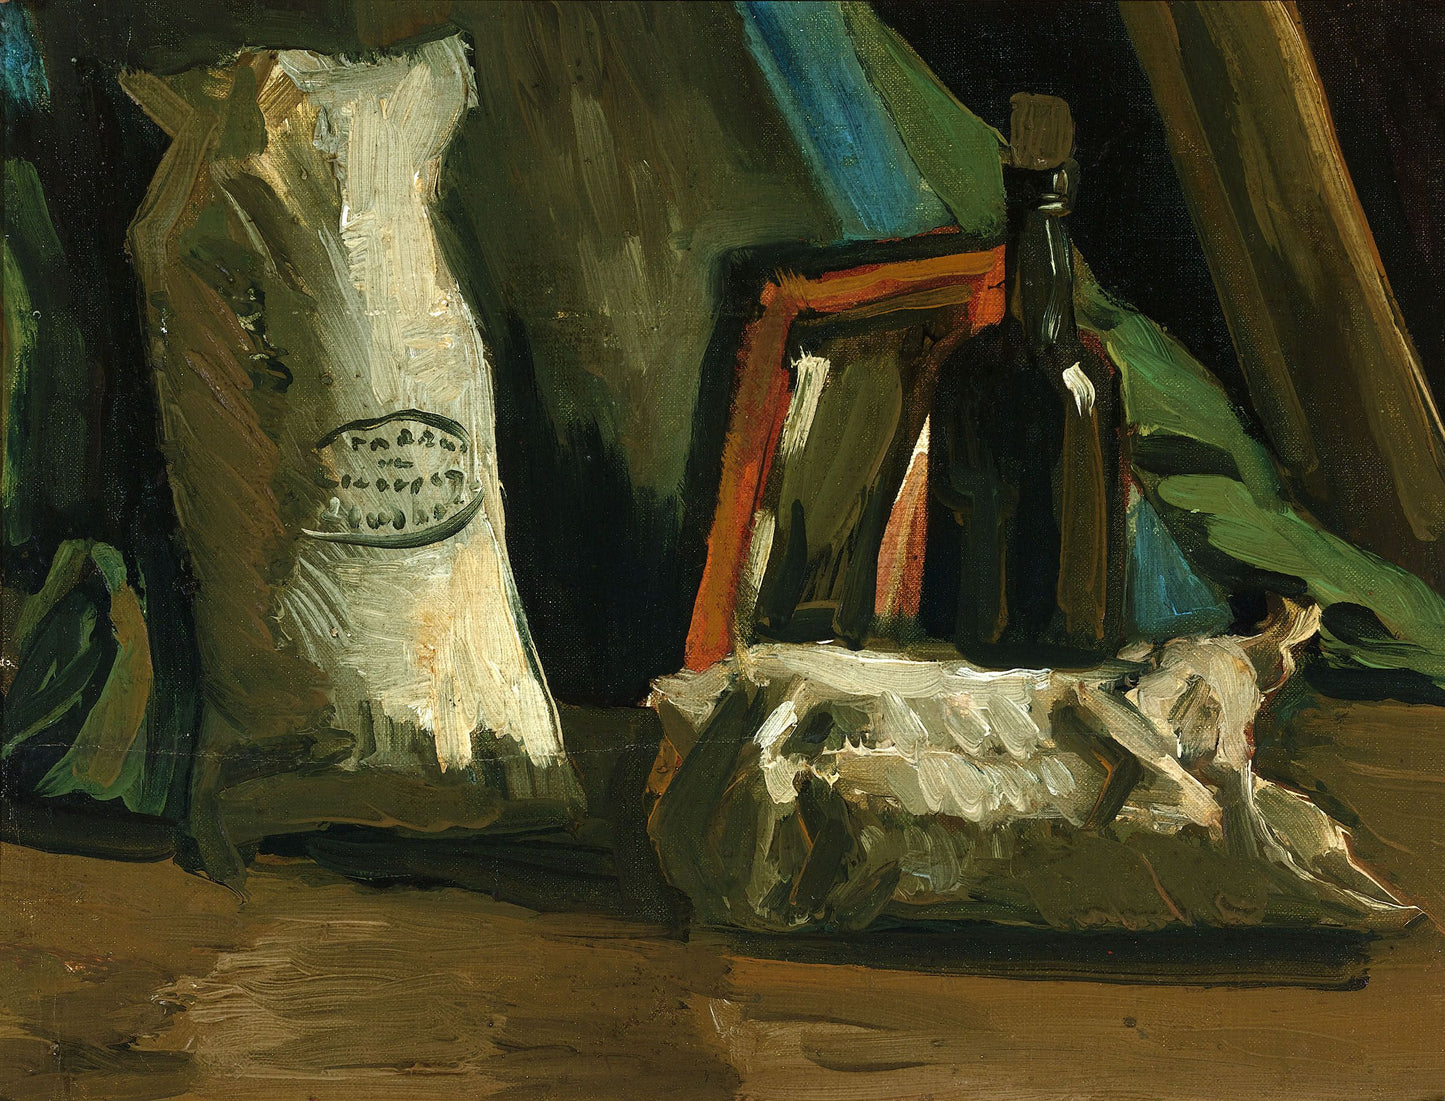 Still Life with Two Sacks and Bottle, 1884